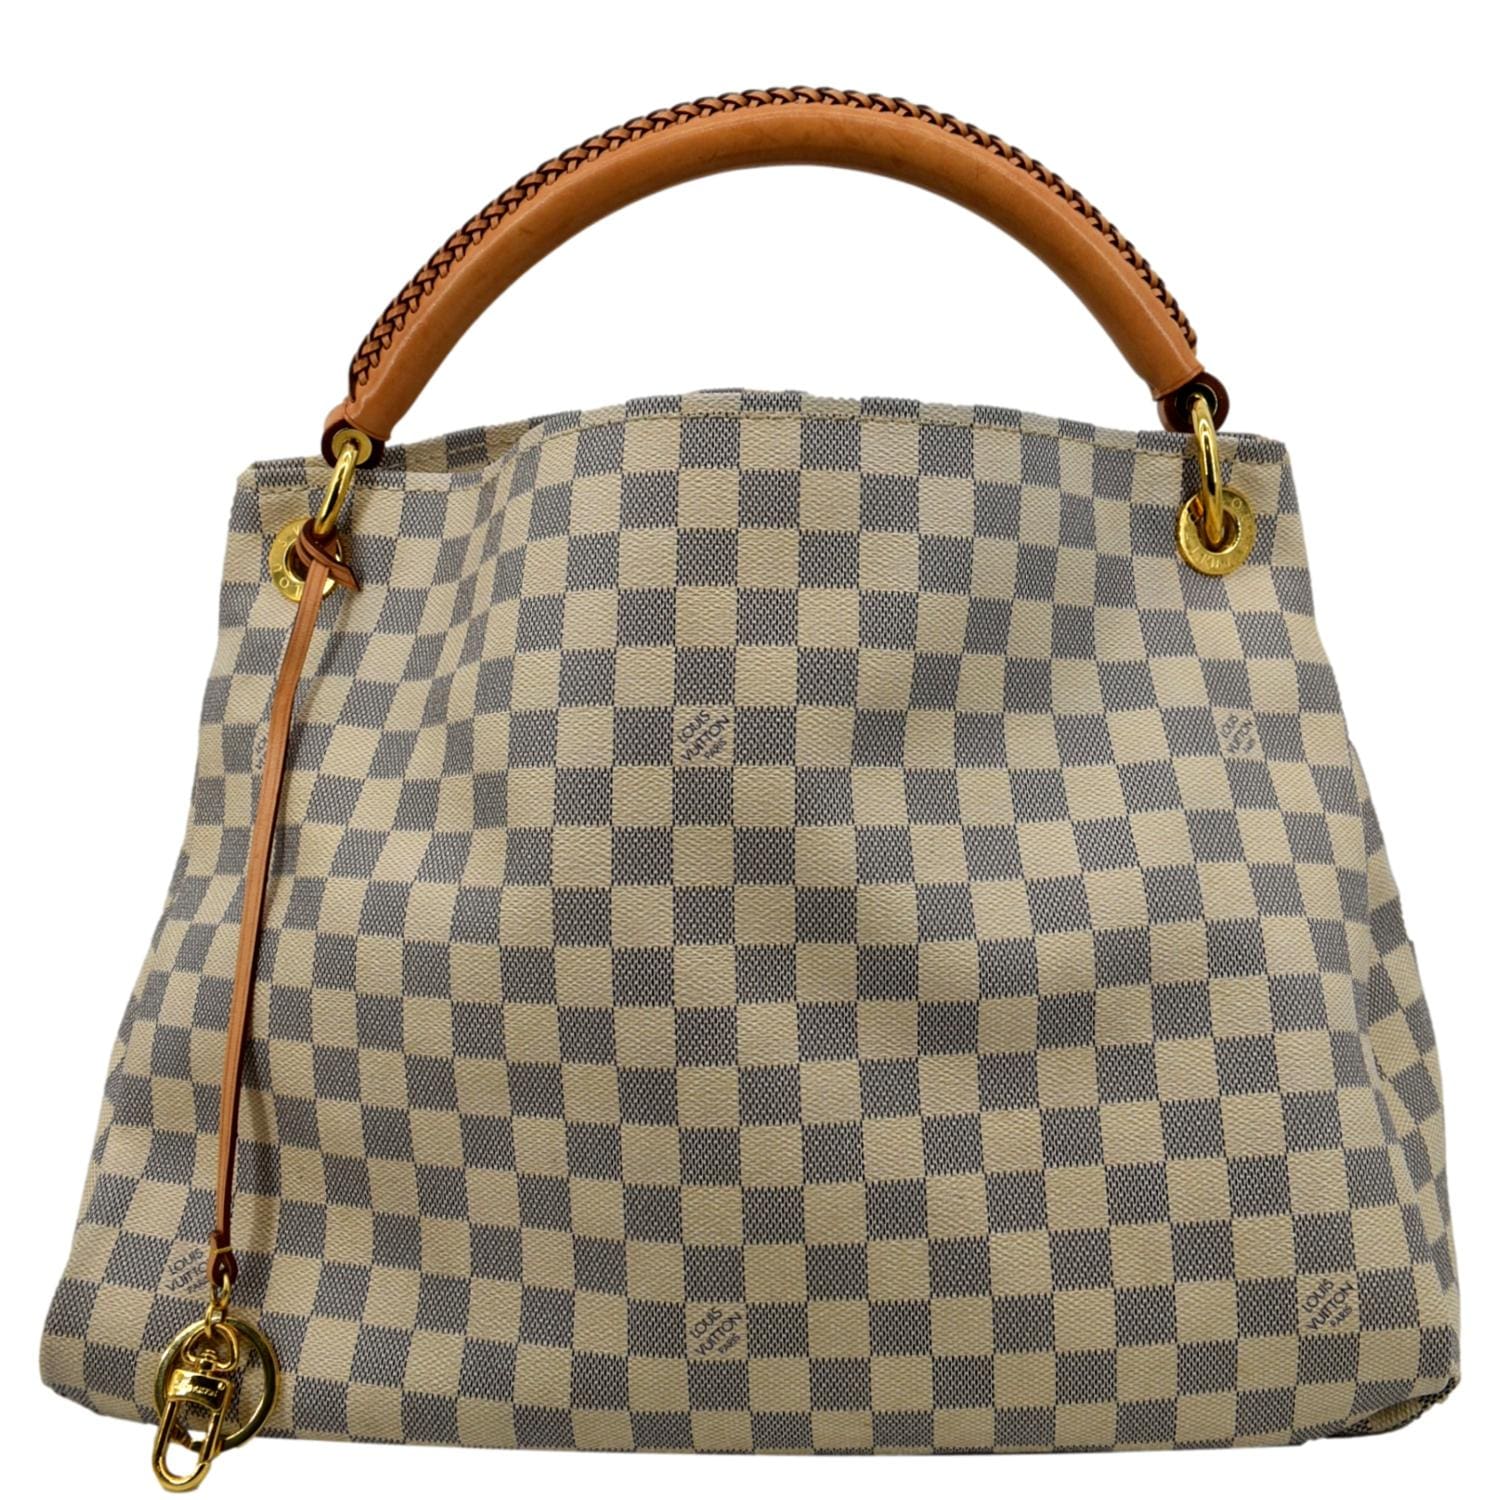 Louis Vuitton Damier Azur Artsy MM This will be my next LV  VDAY I THINK  SO!!